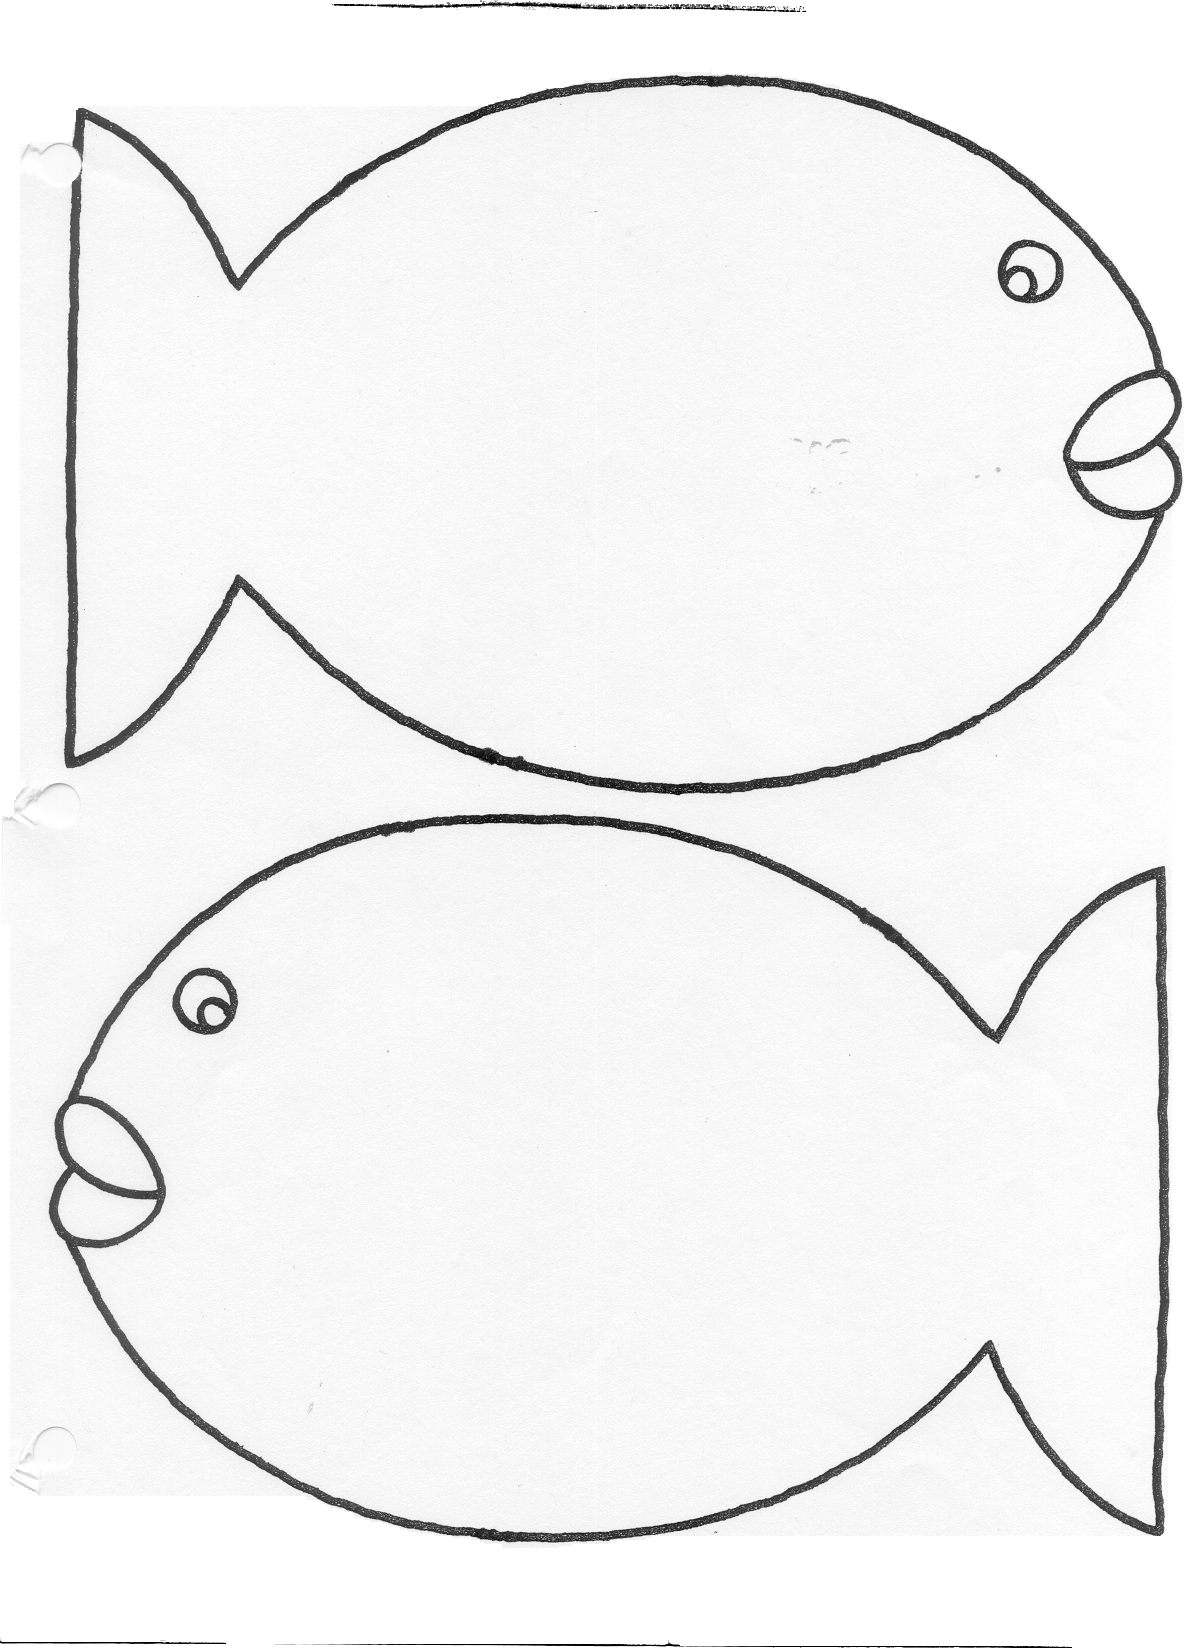 free-rainbow-fish-template-download-free-rainbow-fish-template-png